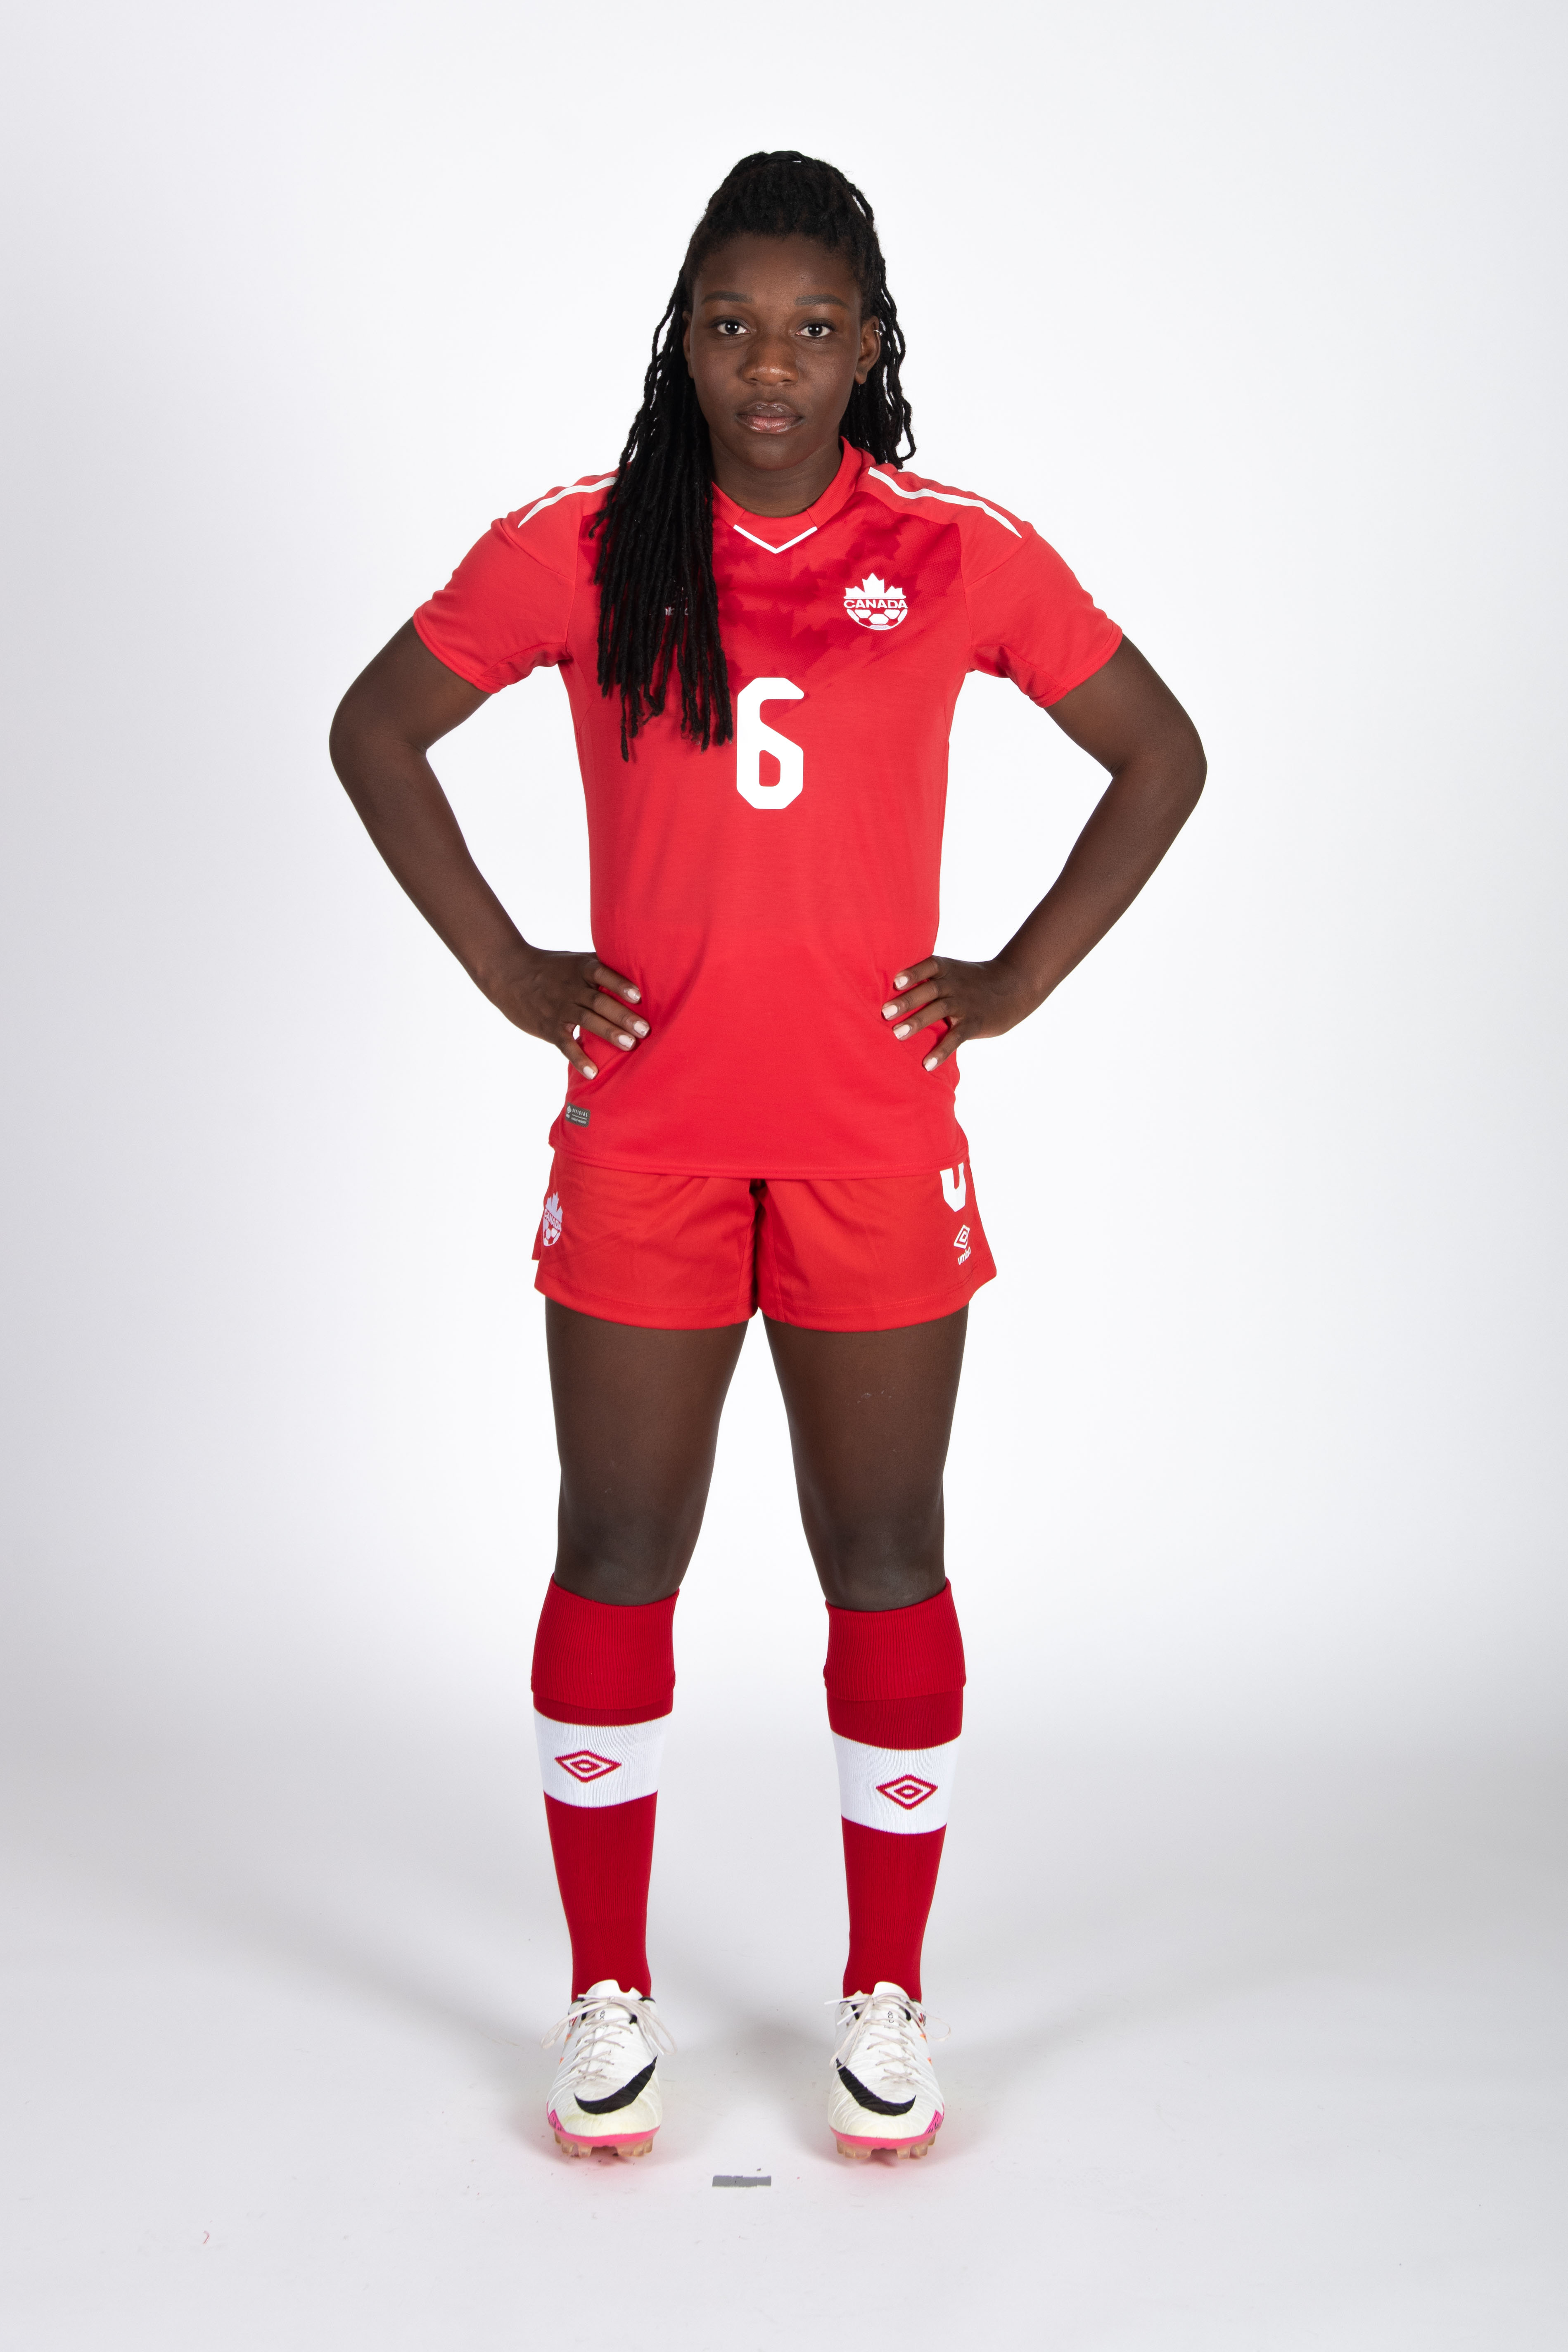 20180604_CANWNT_Rose_byBazyl07